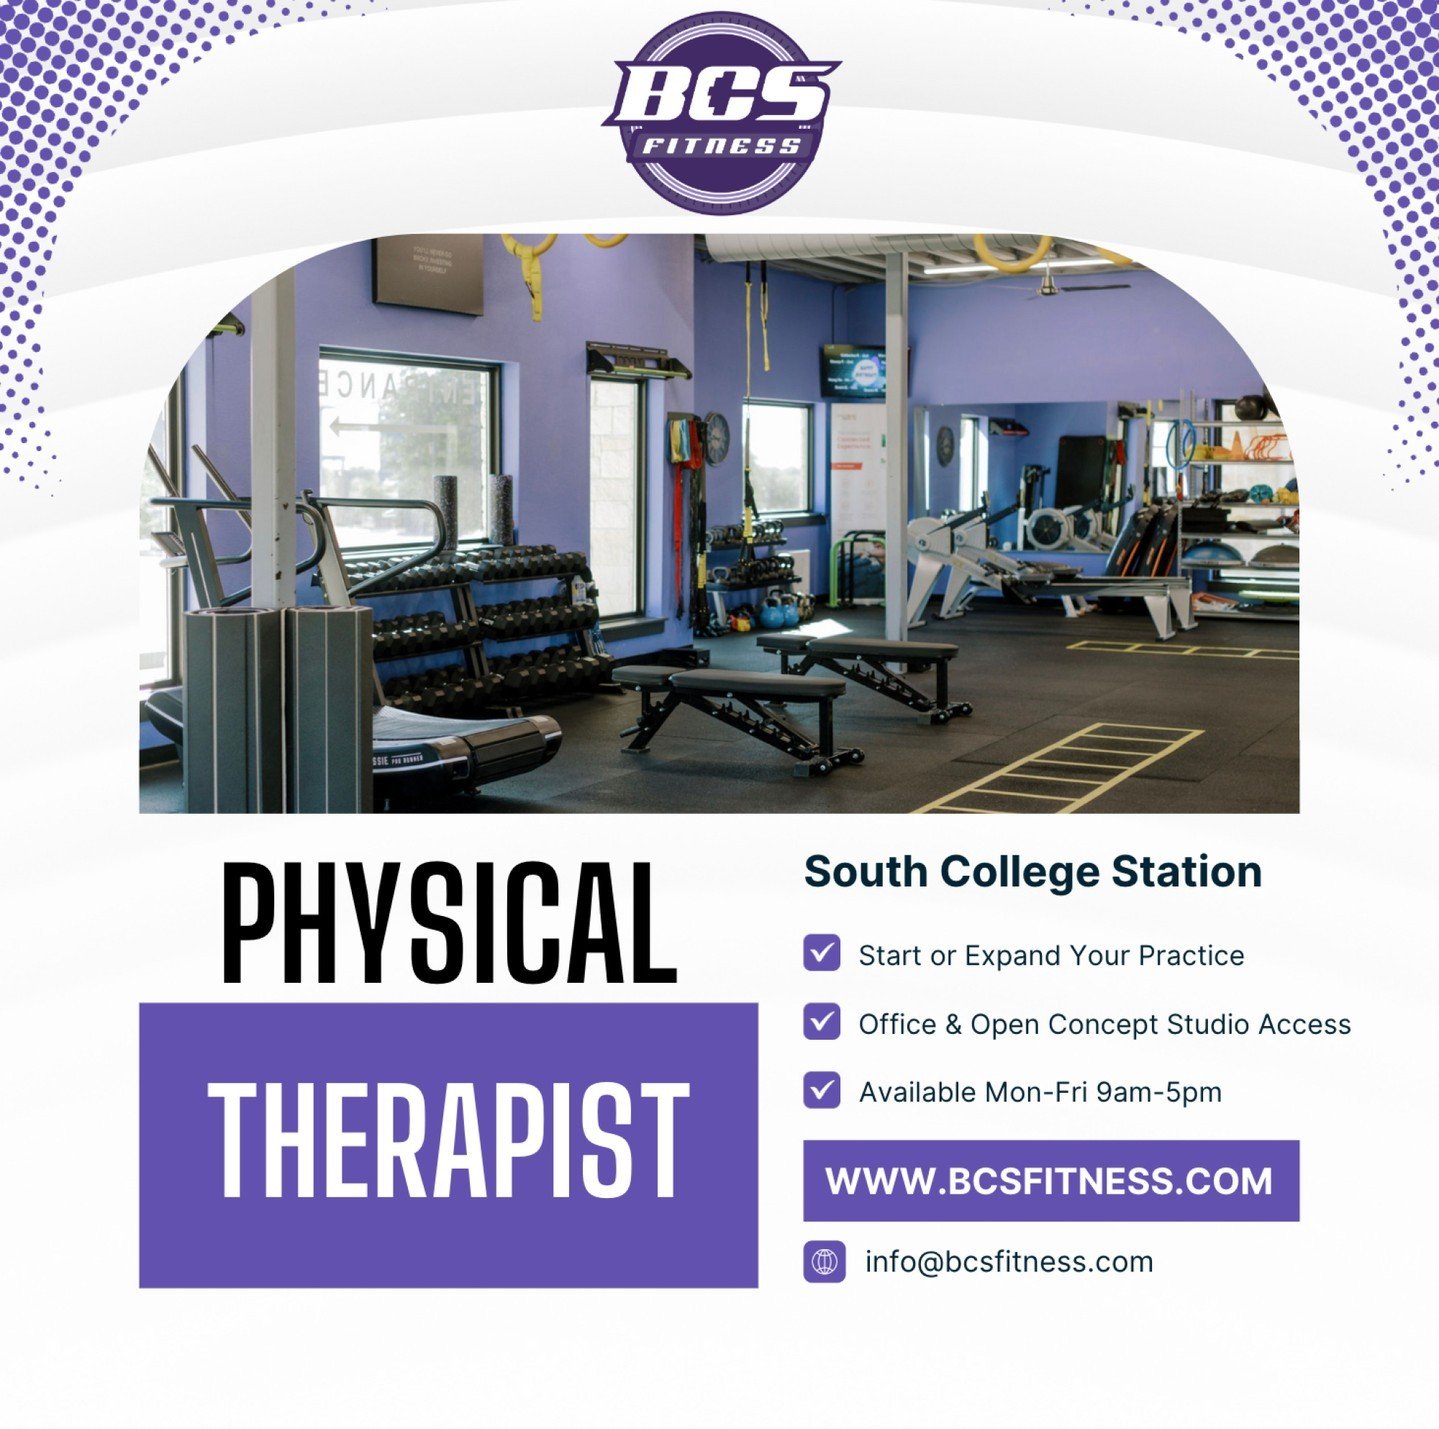 Join our vibrant community at BCS Fitness in South College Station! We're on the hunt for a passionate Physical Therapist who's eager to start or expand their practice. Nestled within our 2500 sq foot personal training studio, this is a golden opport